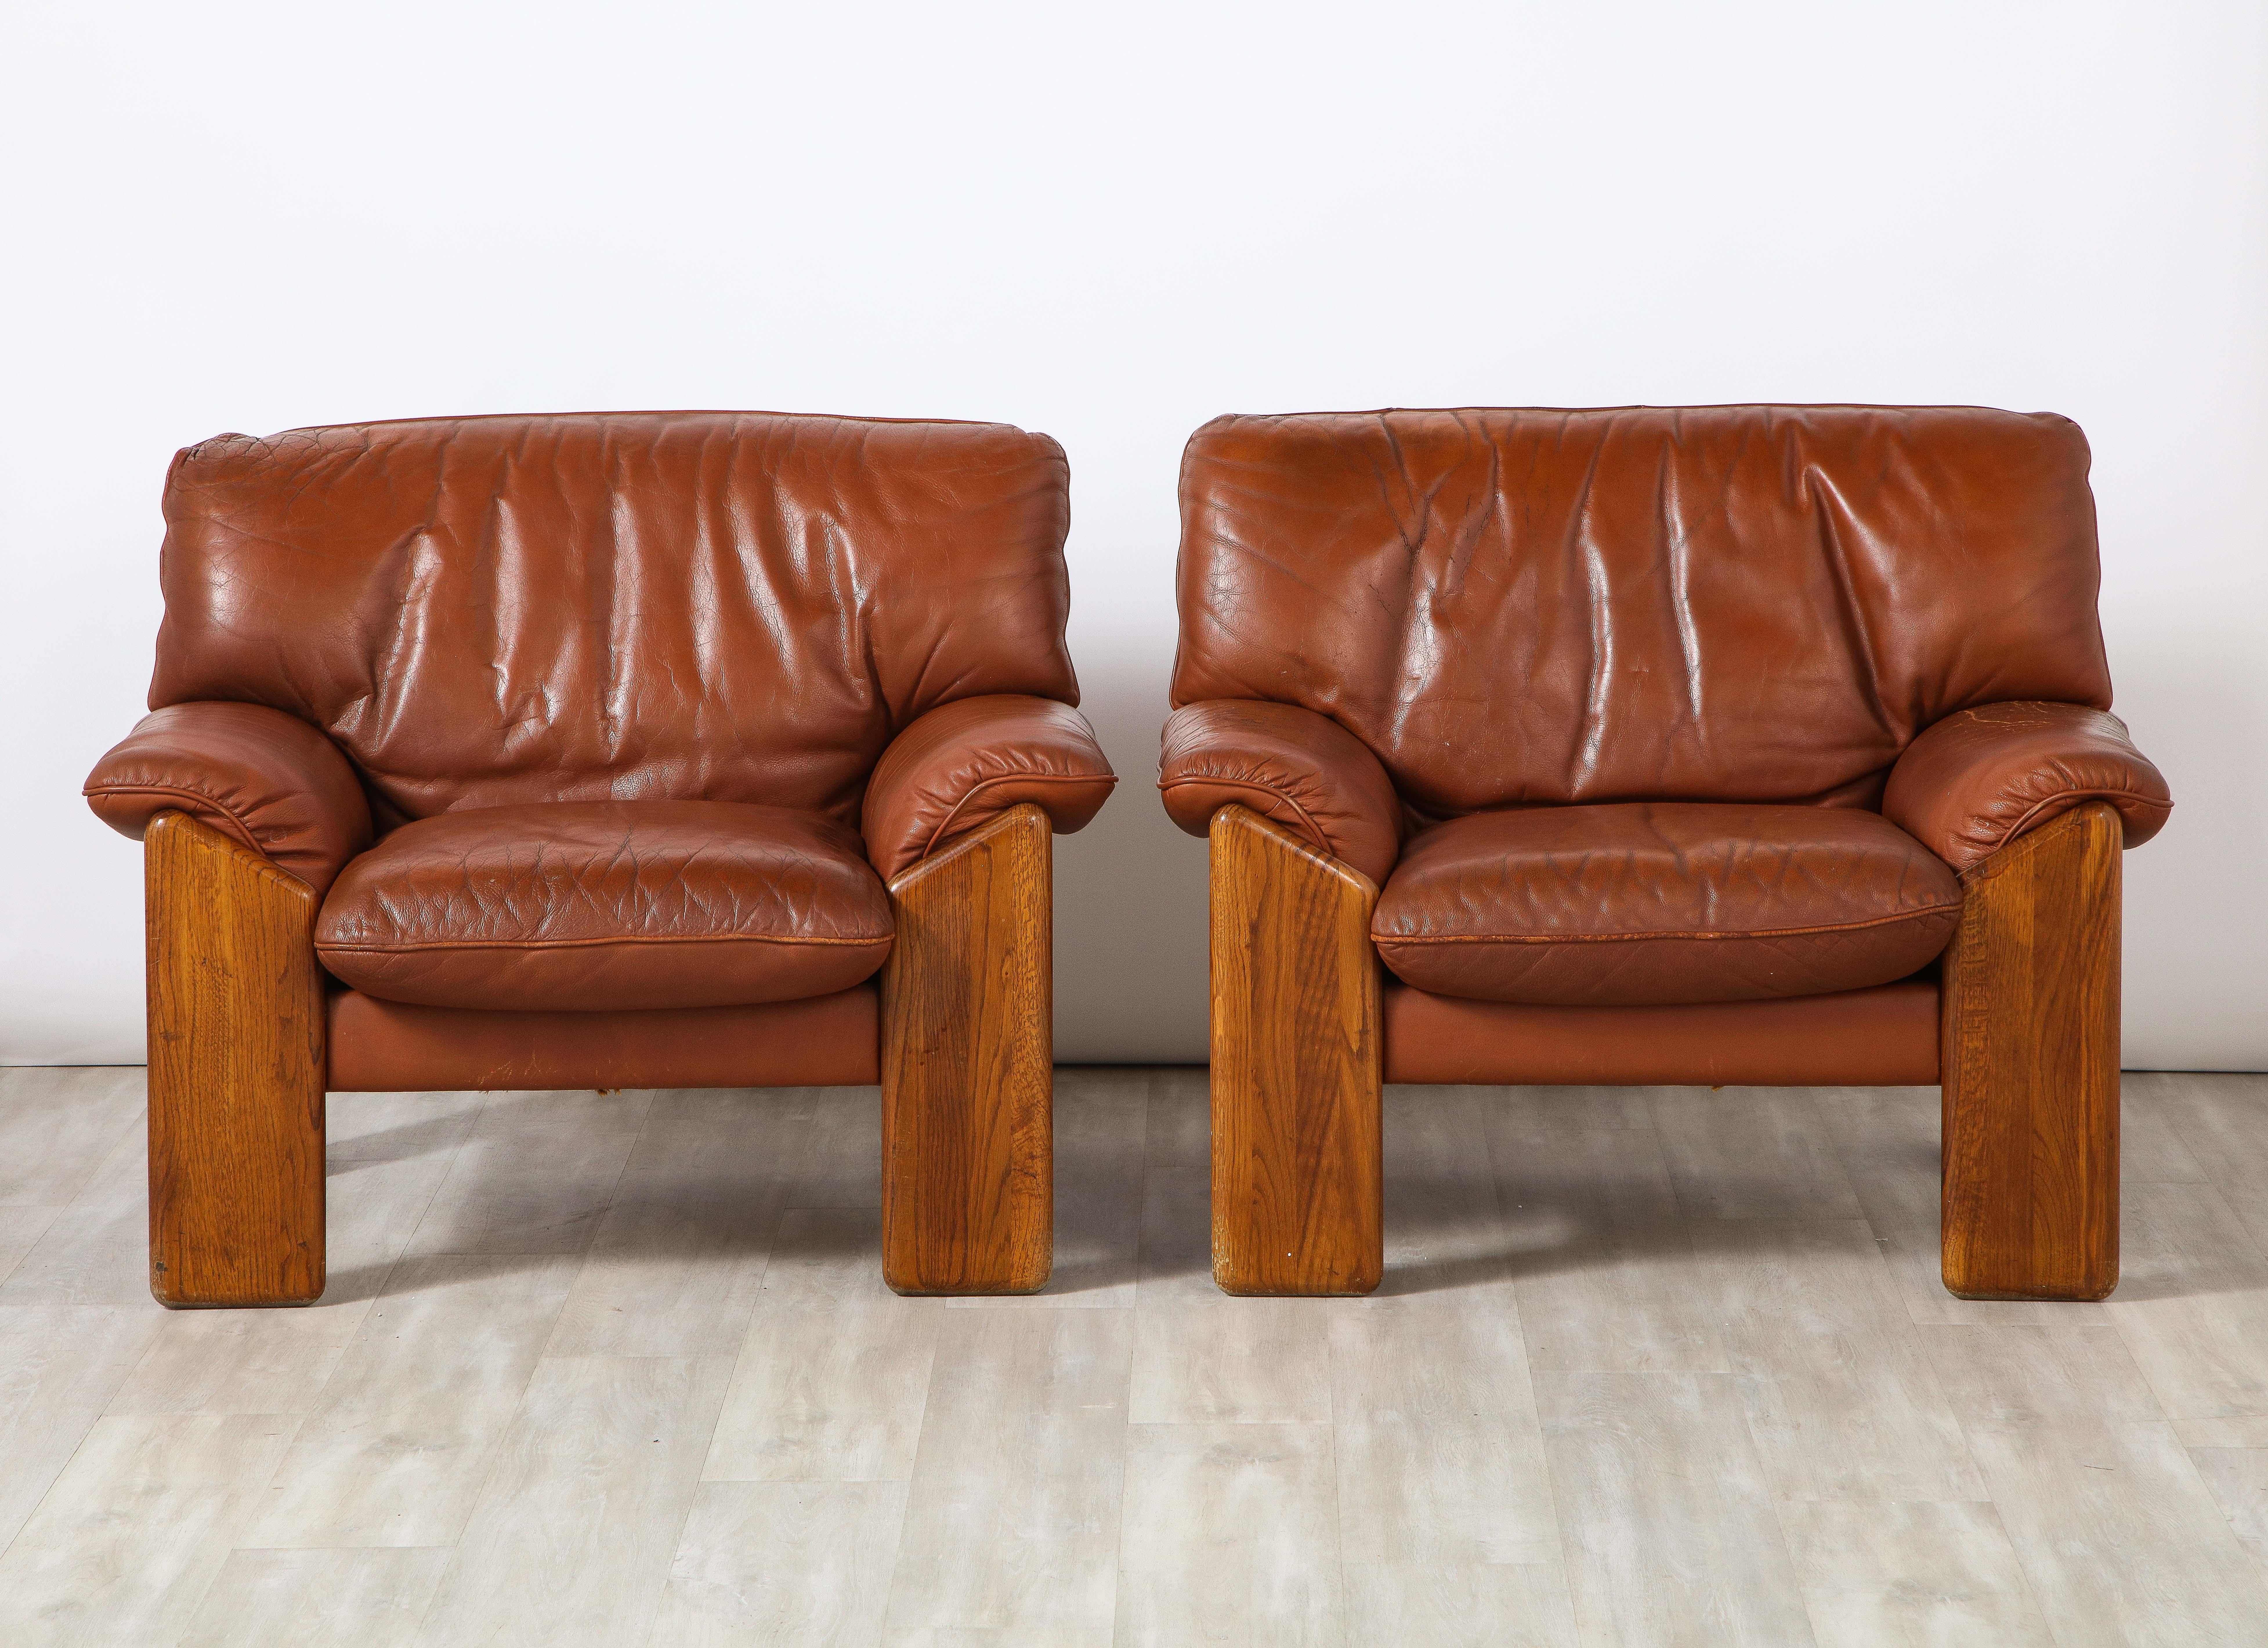 A pair of walnut and leather lounge chairs by Mobil Girgi, made in the 1970's, Italy. Stamped. Beautifully designed with angled front legs which extend to the sides and back of the chairs, the back support is slightly curved. The flat upholstered